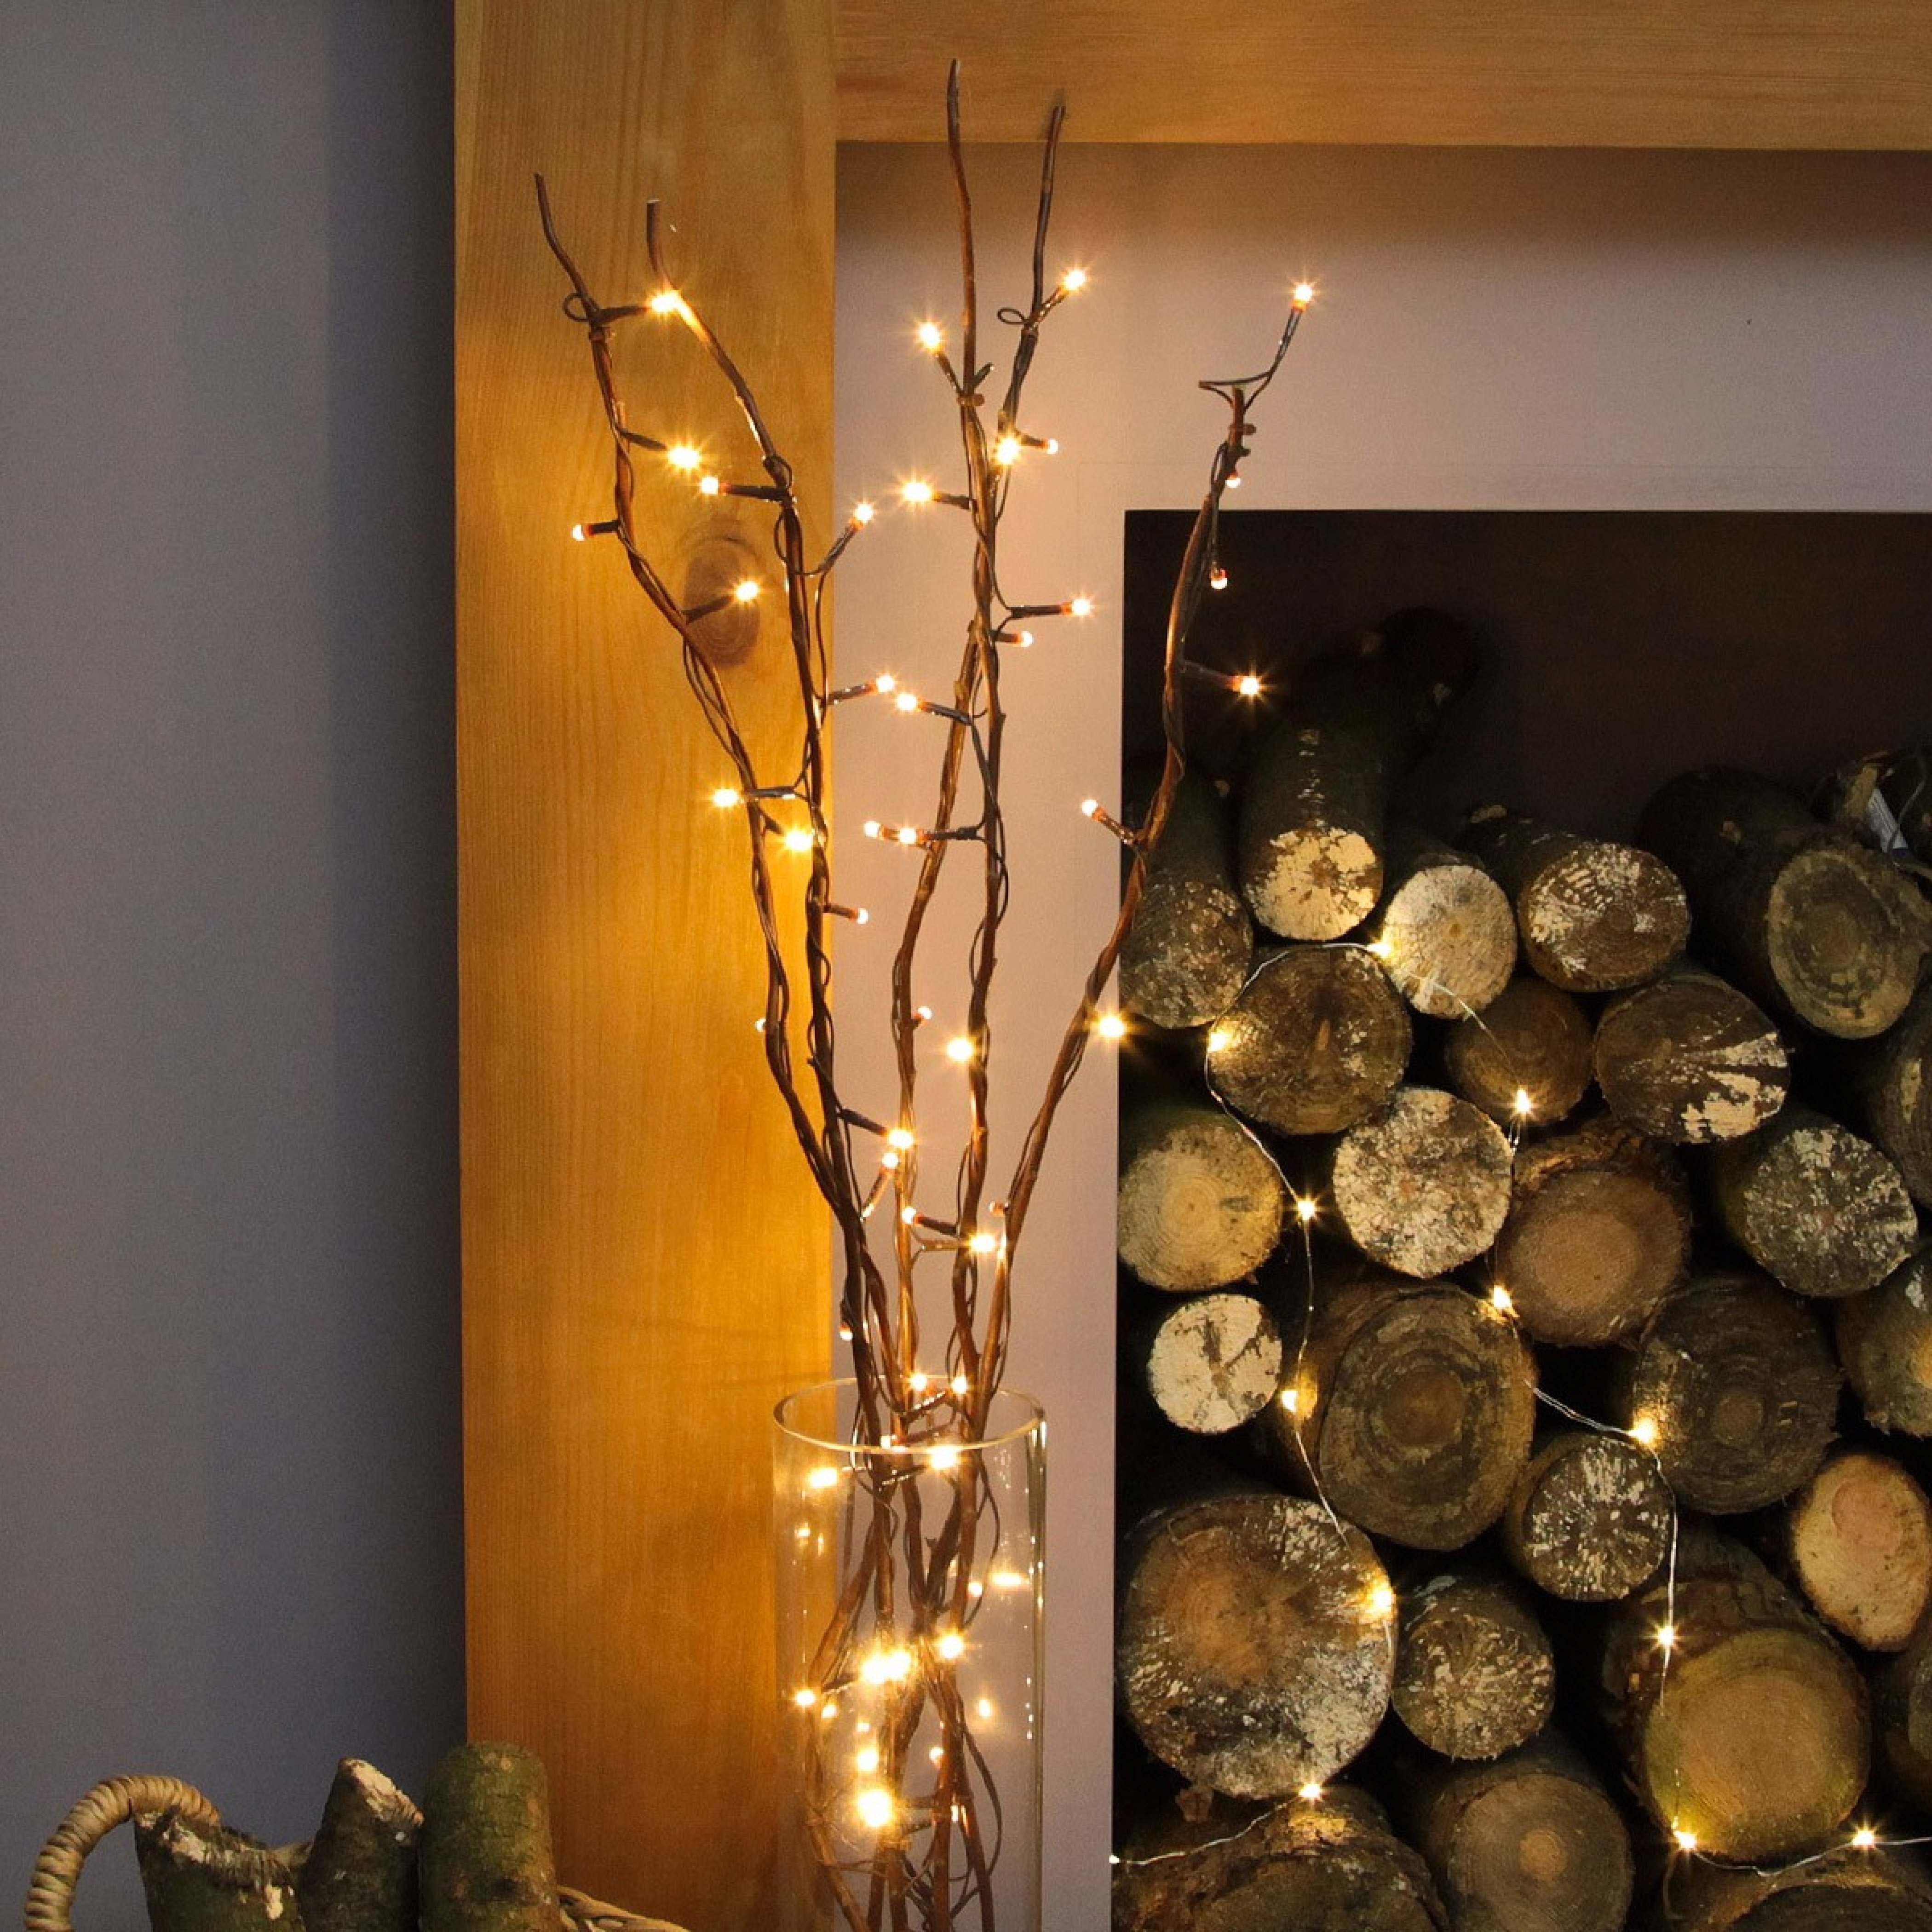 ... 5 decorative brown willow twig lights, 50 warm white leds ... MGKYOFN